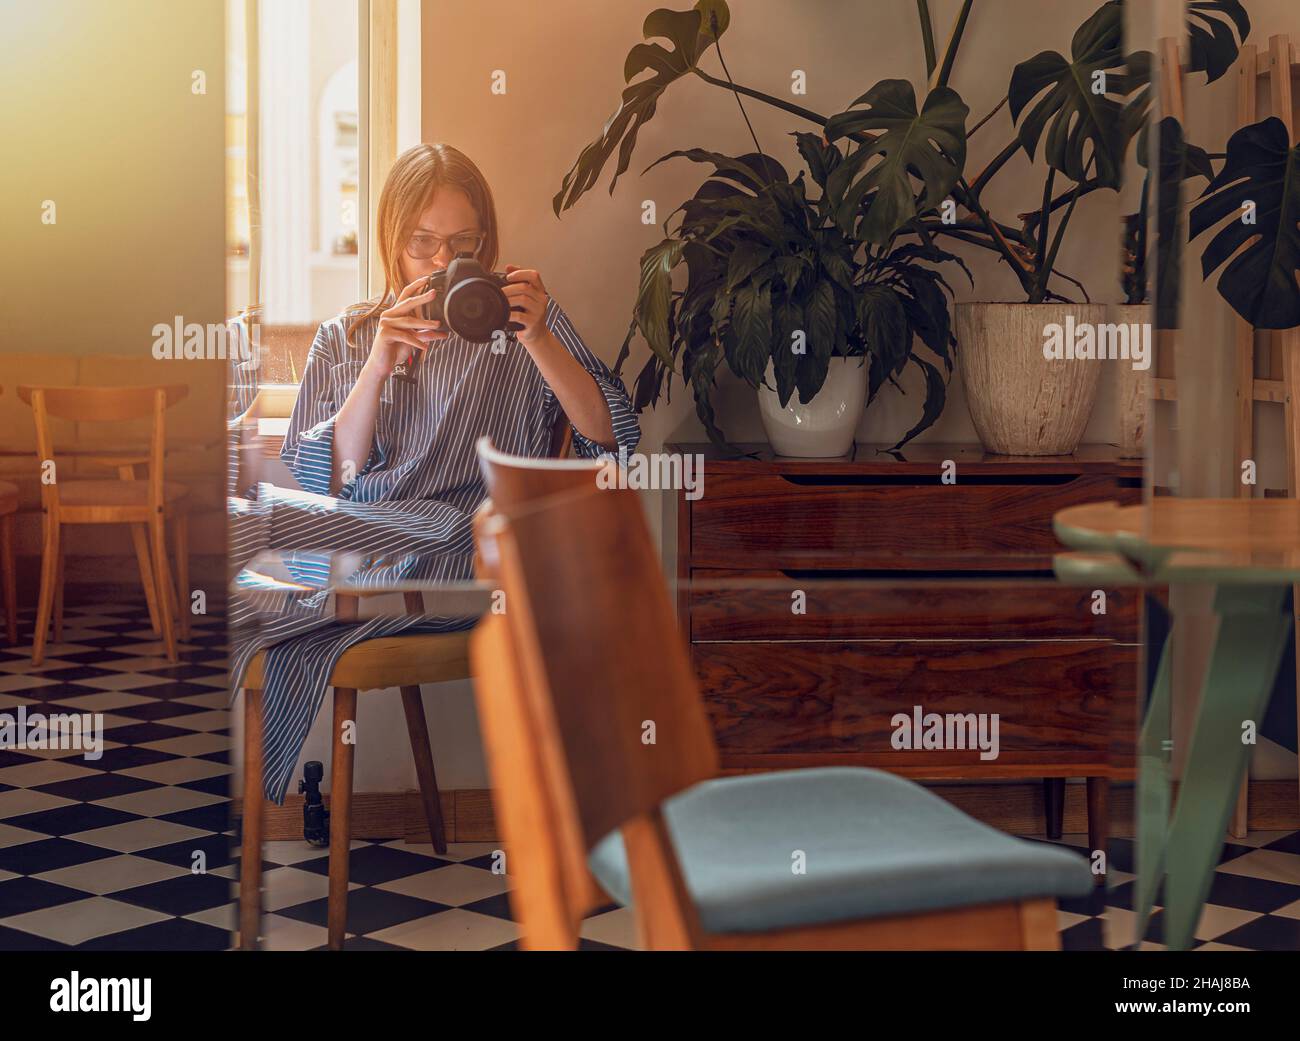 Young woman taking photo of herself, her reflection in mirror in modern cafe with day light and plants. Photographer with professional camera. Stock Photo